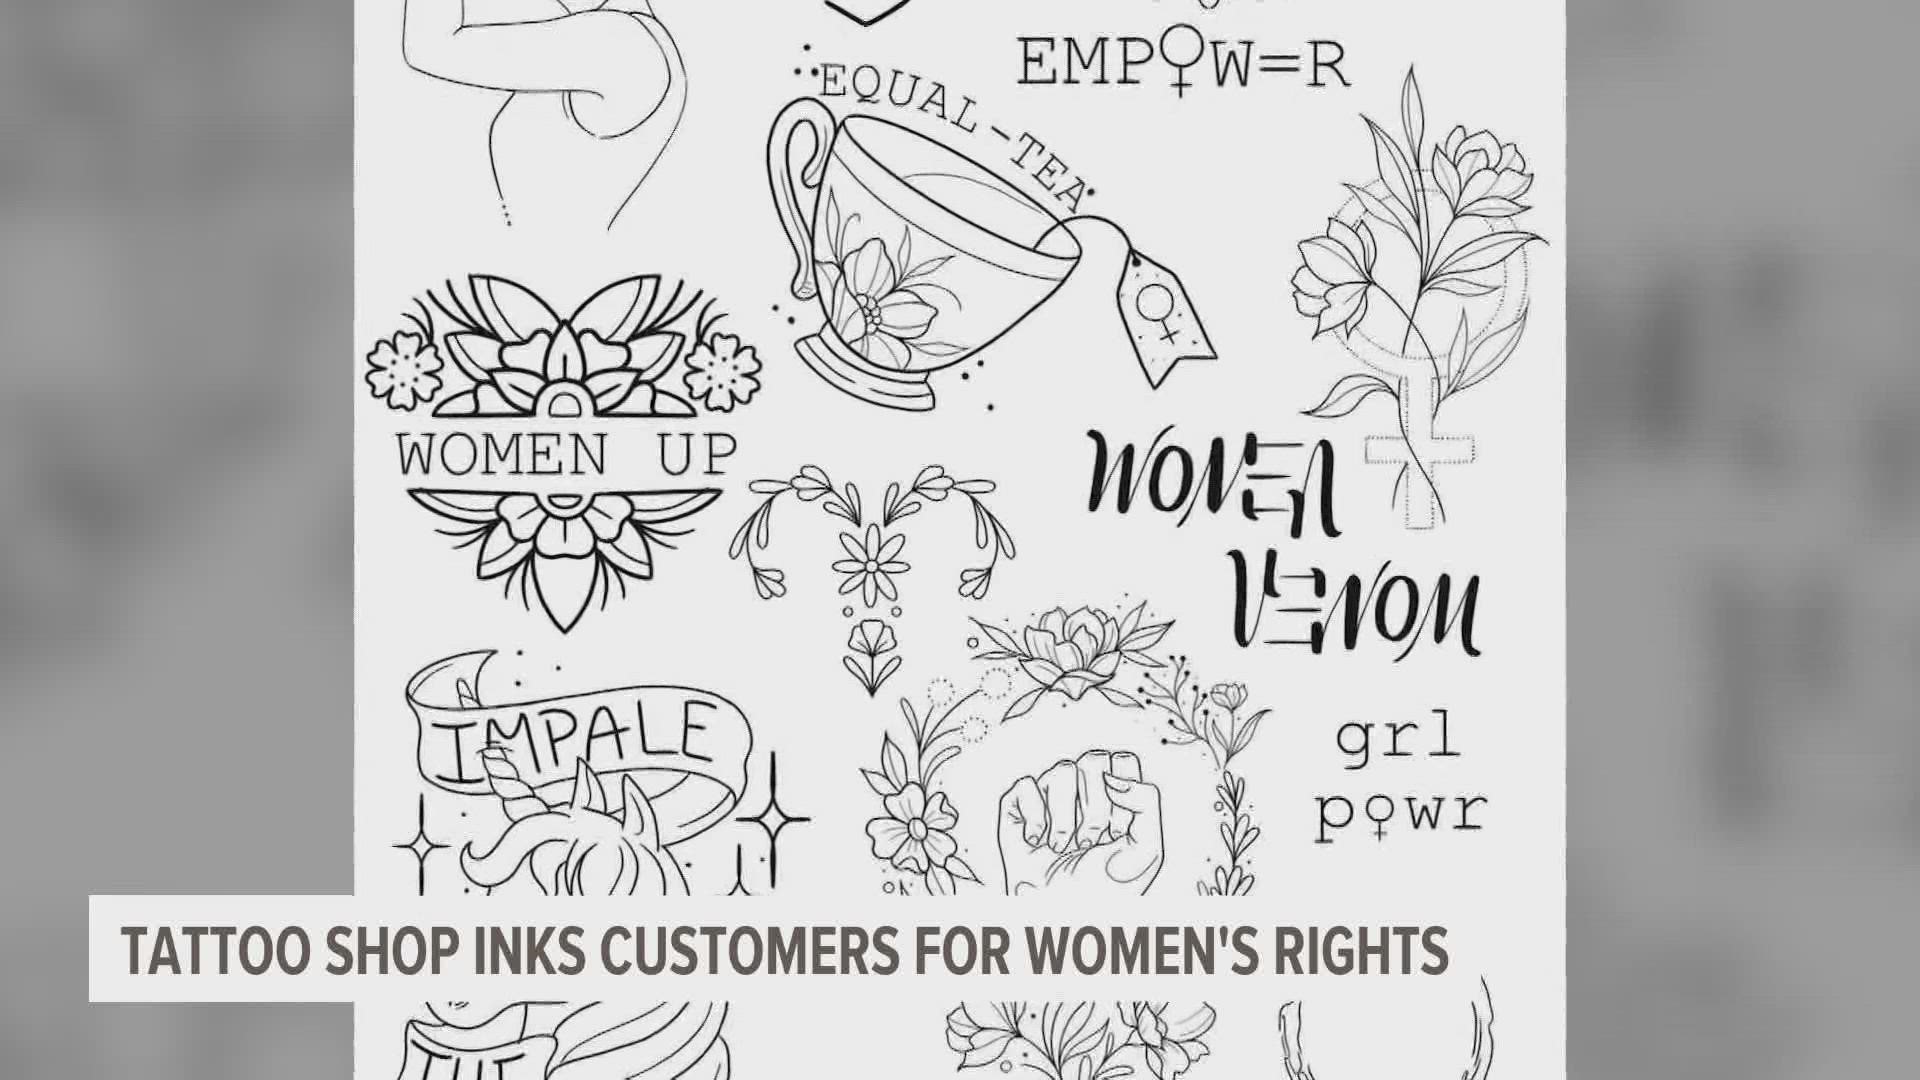 Inking customers to raise awareness about women's rights